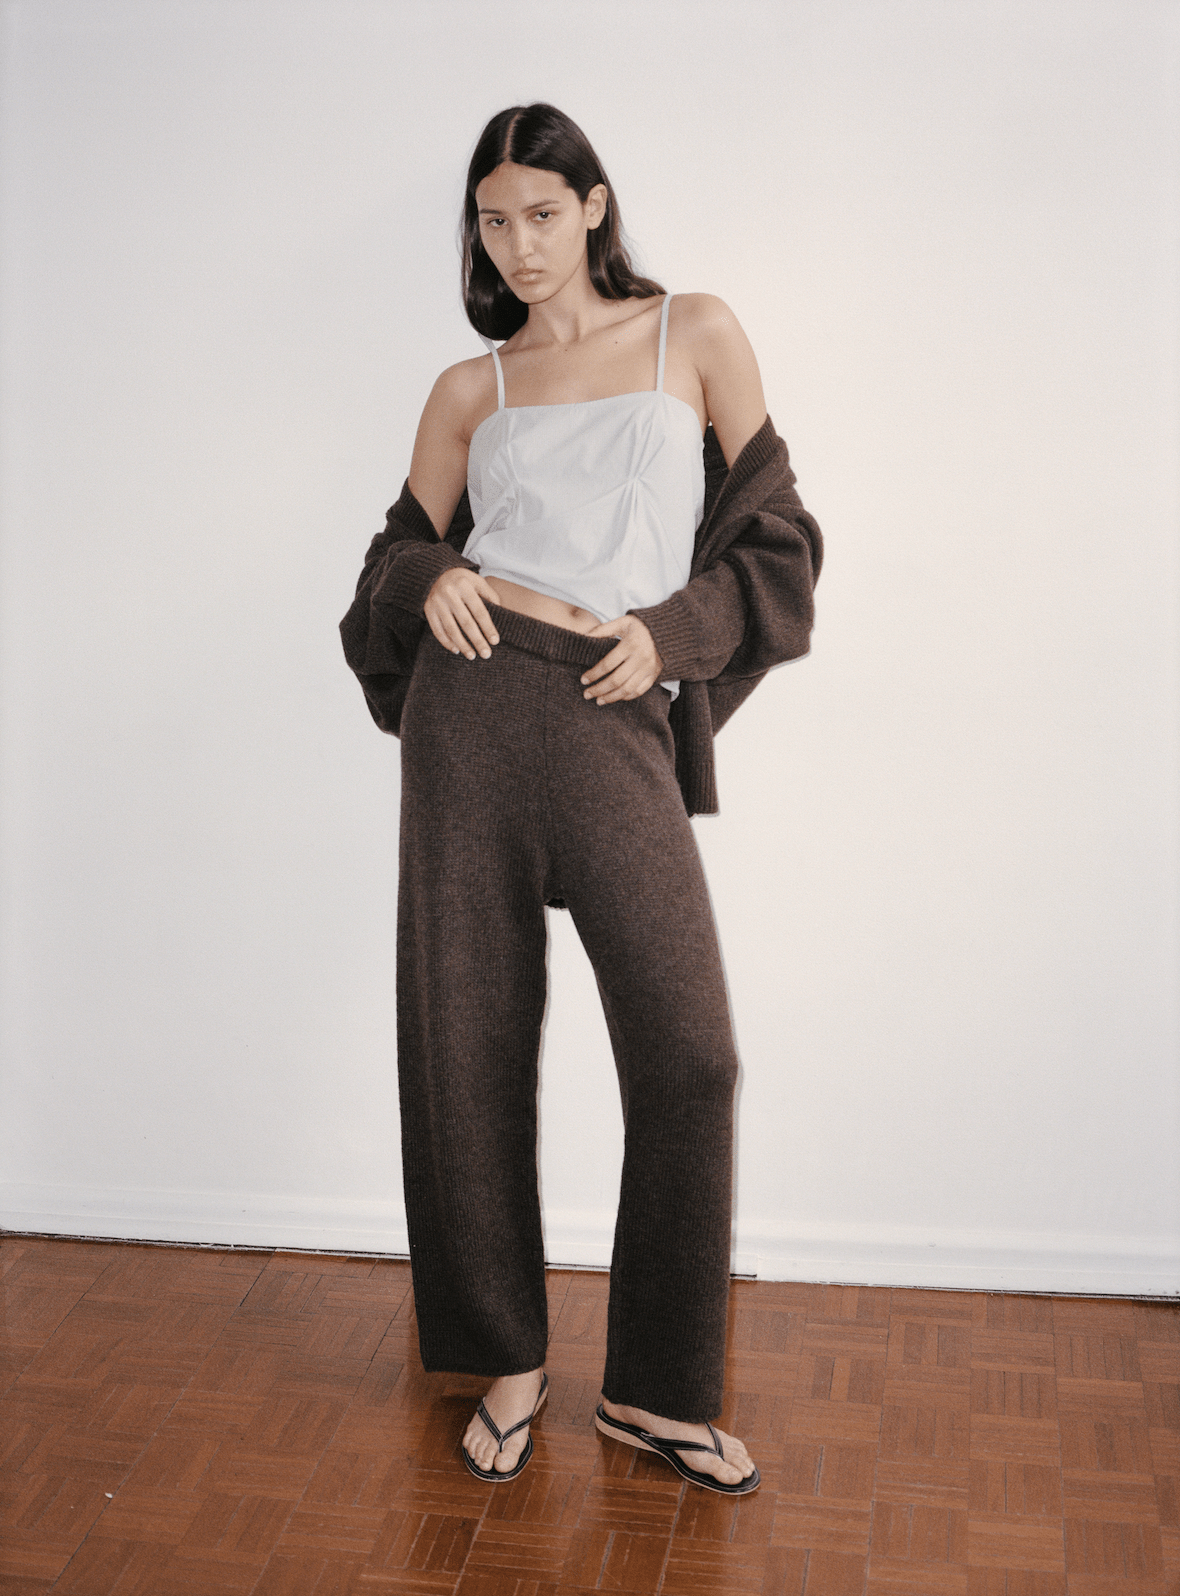 Film image of female model wearing the top from the Pleat Set in Dream Stripe, worn with the Straight Leg Knit Pants in plum and Two Tie Cardigan in plum worn off the shoulders.